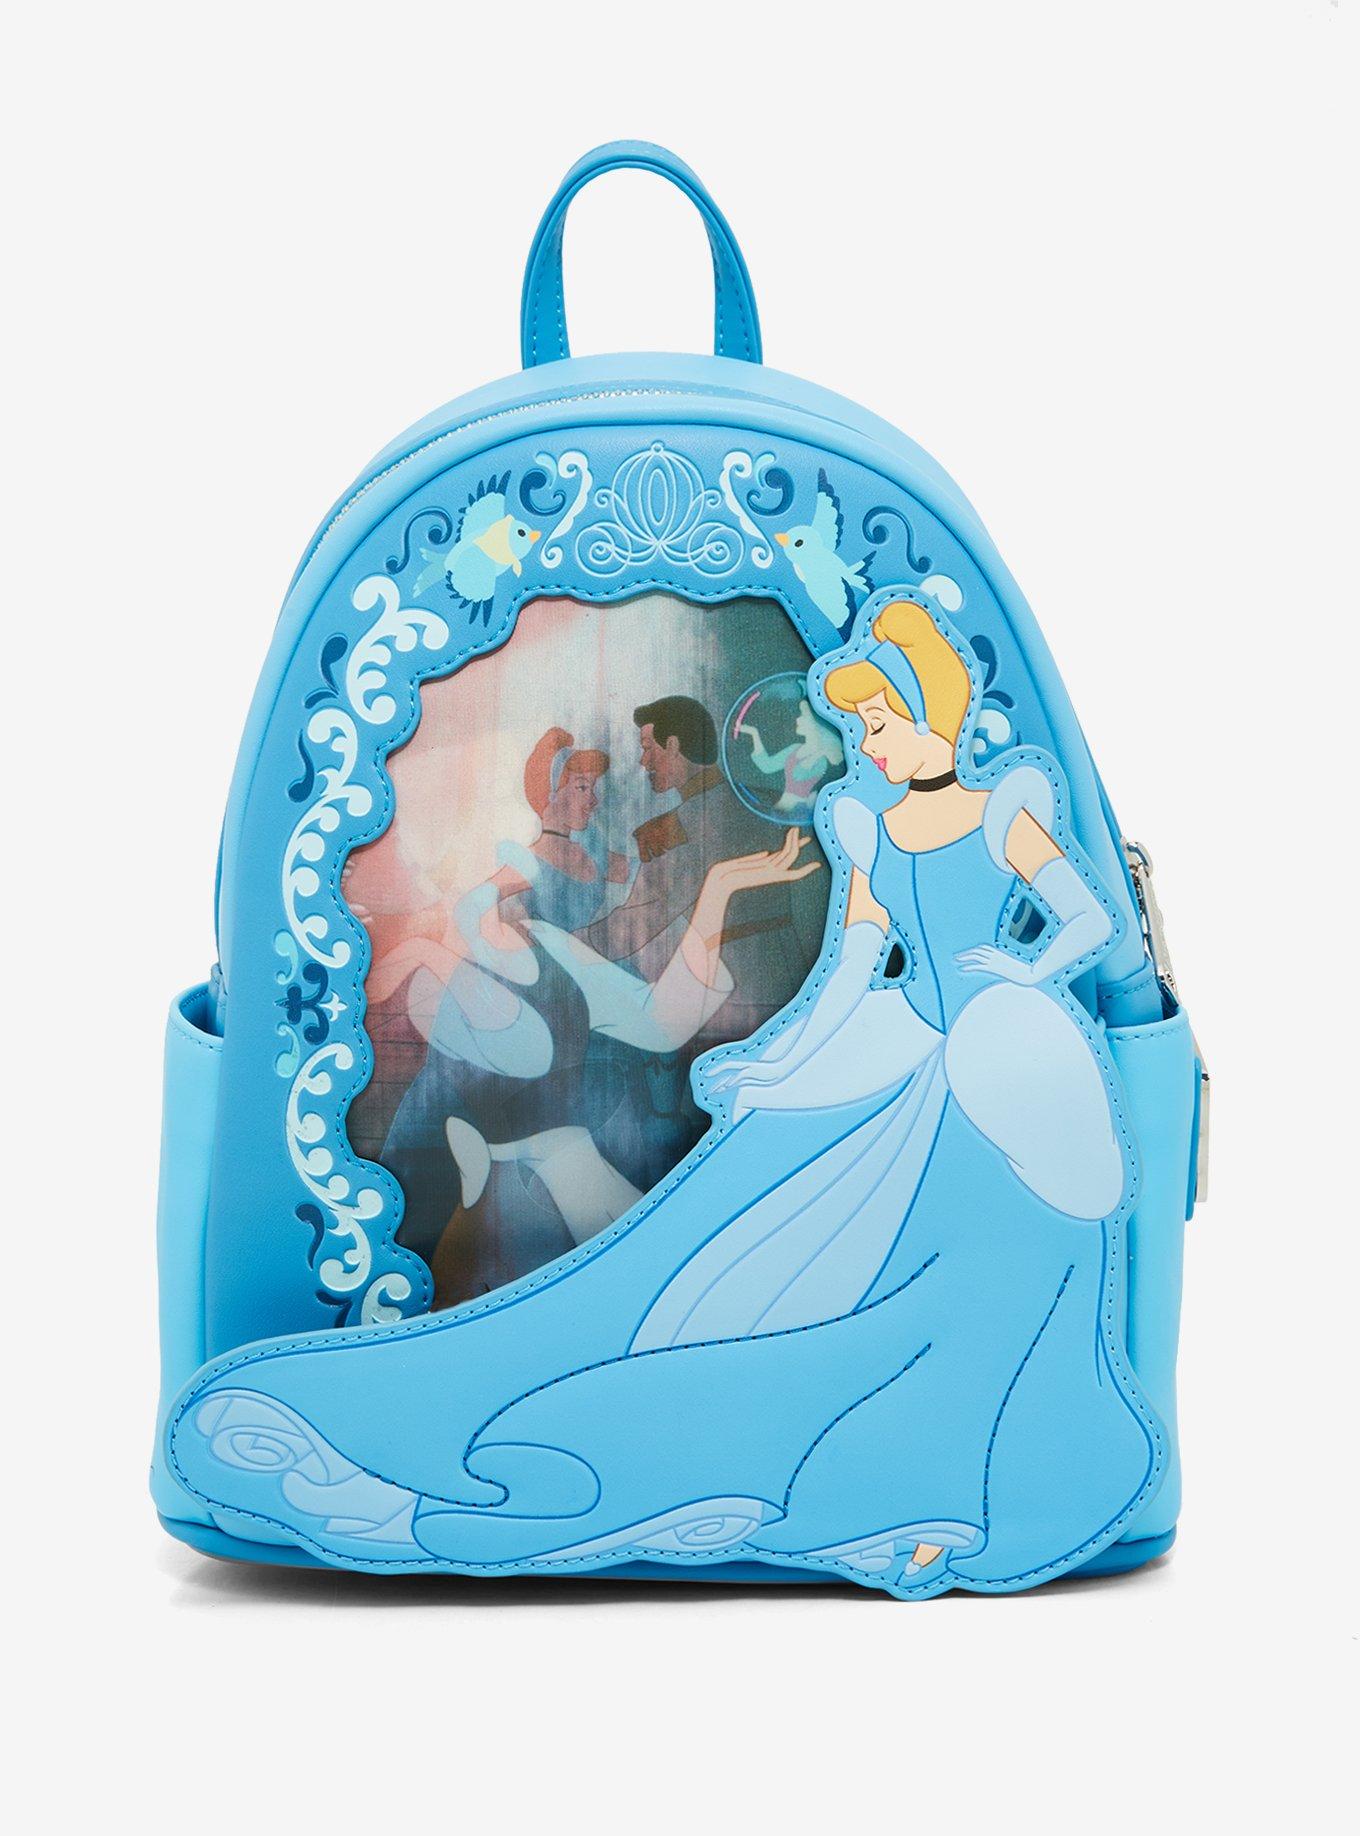  Pop by Loungefly Disney Maleficent Dragon Cosplay Backpack :  Clothing, Shoes & Jewelry